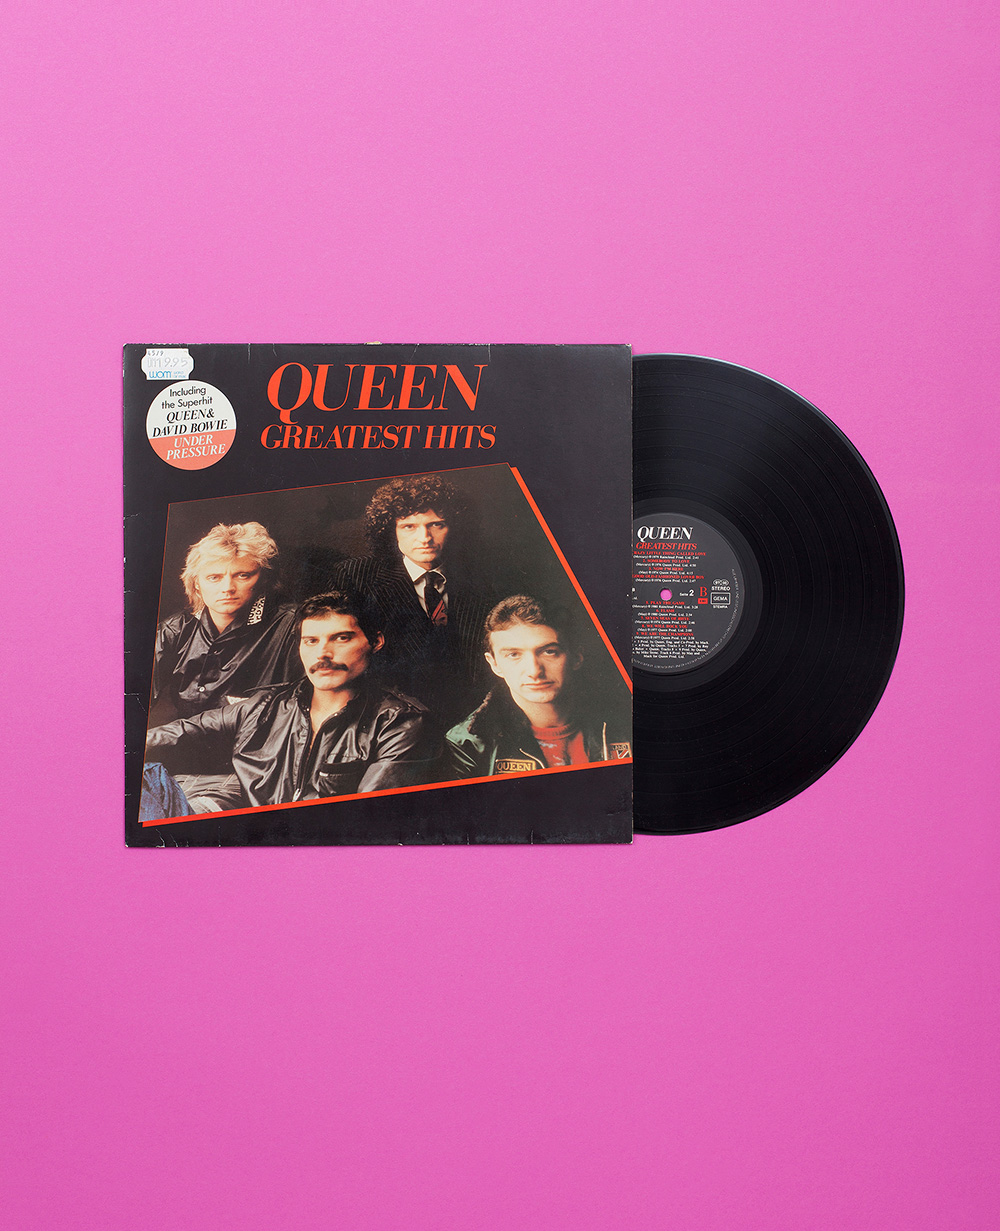 Queen LP Greatest Hits on purple background